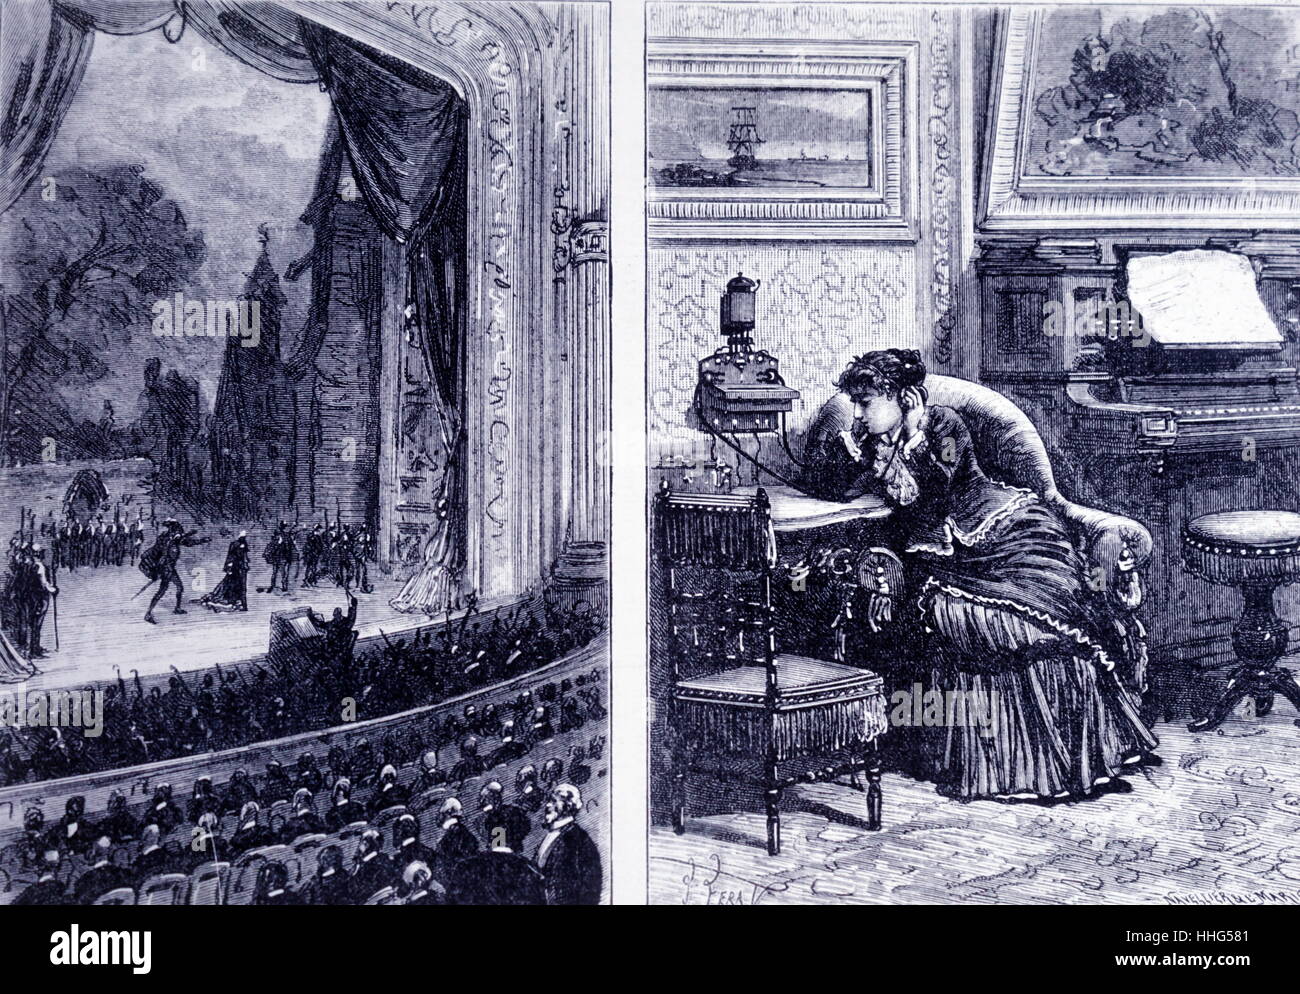 Woman listening to an opera performance in her own home by means of the Ader Bell telephone, and Ader's arrangement for music transmission. On the stage microphones were placed either die of the prompt box and a different signal was received through each earpiece, giving a stereophonic effect. Dated 1883 Stock Photo